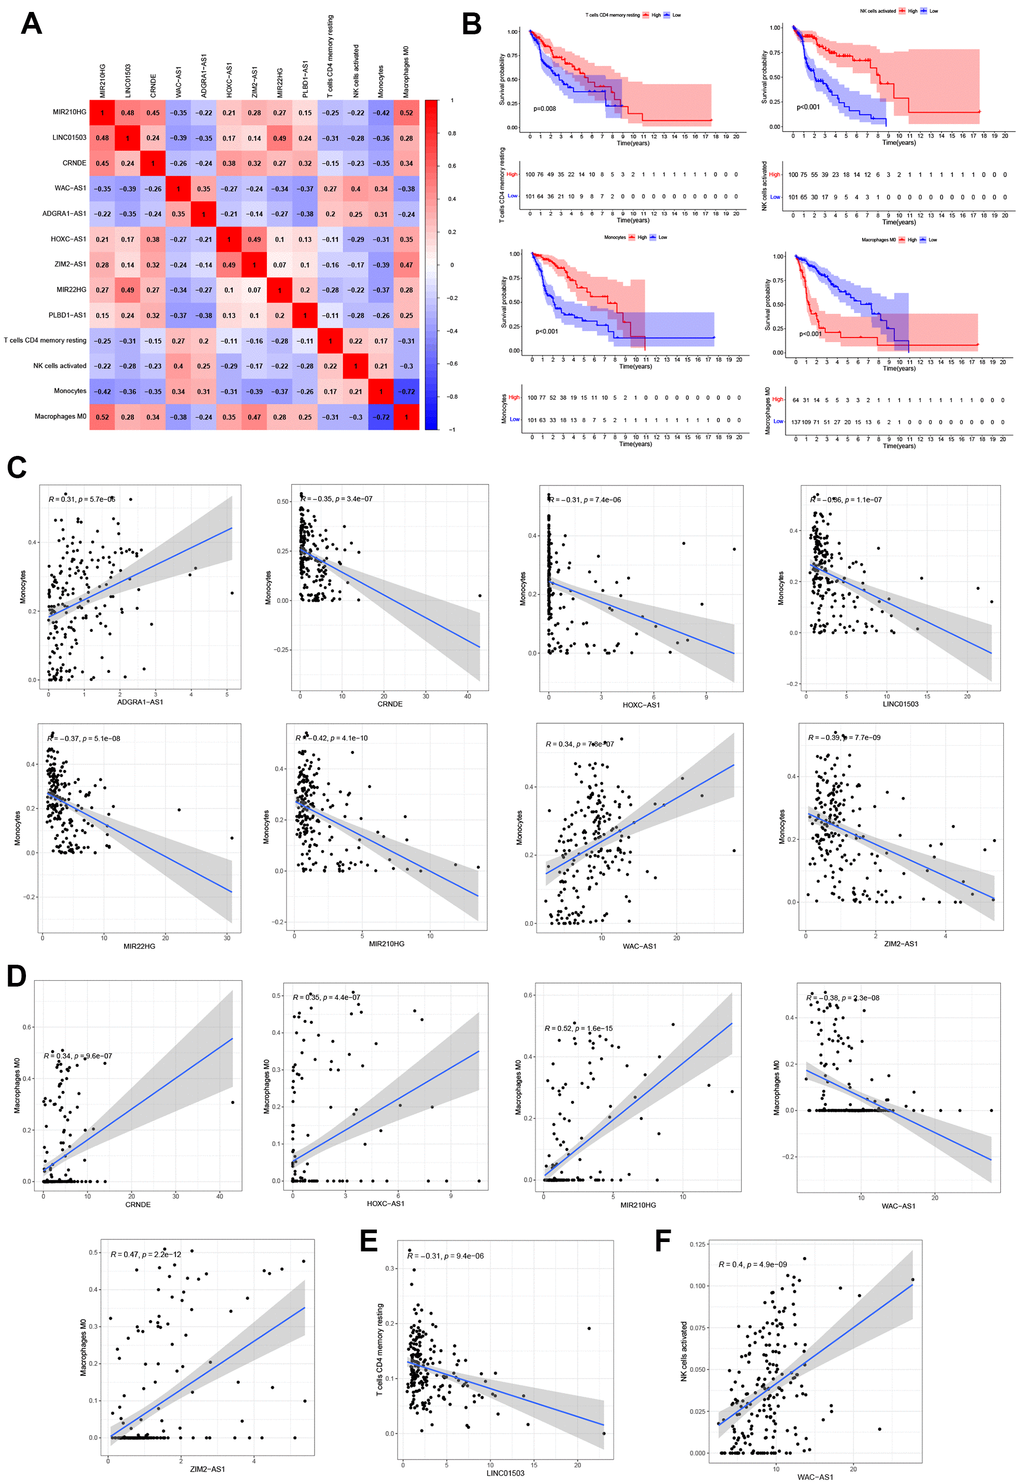 Correlation analysis of 9 NRLs and immunity. (A) Heatmap of 9 NRLs and 4 immune cells (T cells CD4 memory resting, NK cells activated, Monocytes and Macrophages M0). (B) Kaplan-Meier survival analysis. (C–F) The relationship between 9 NRLs and 4 infiltrations of immune cells.